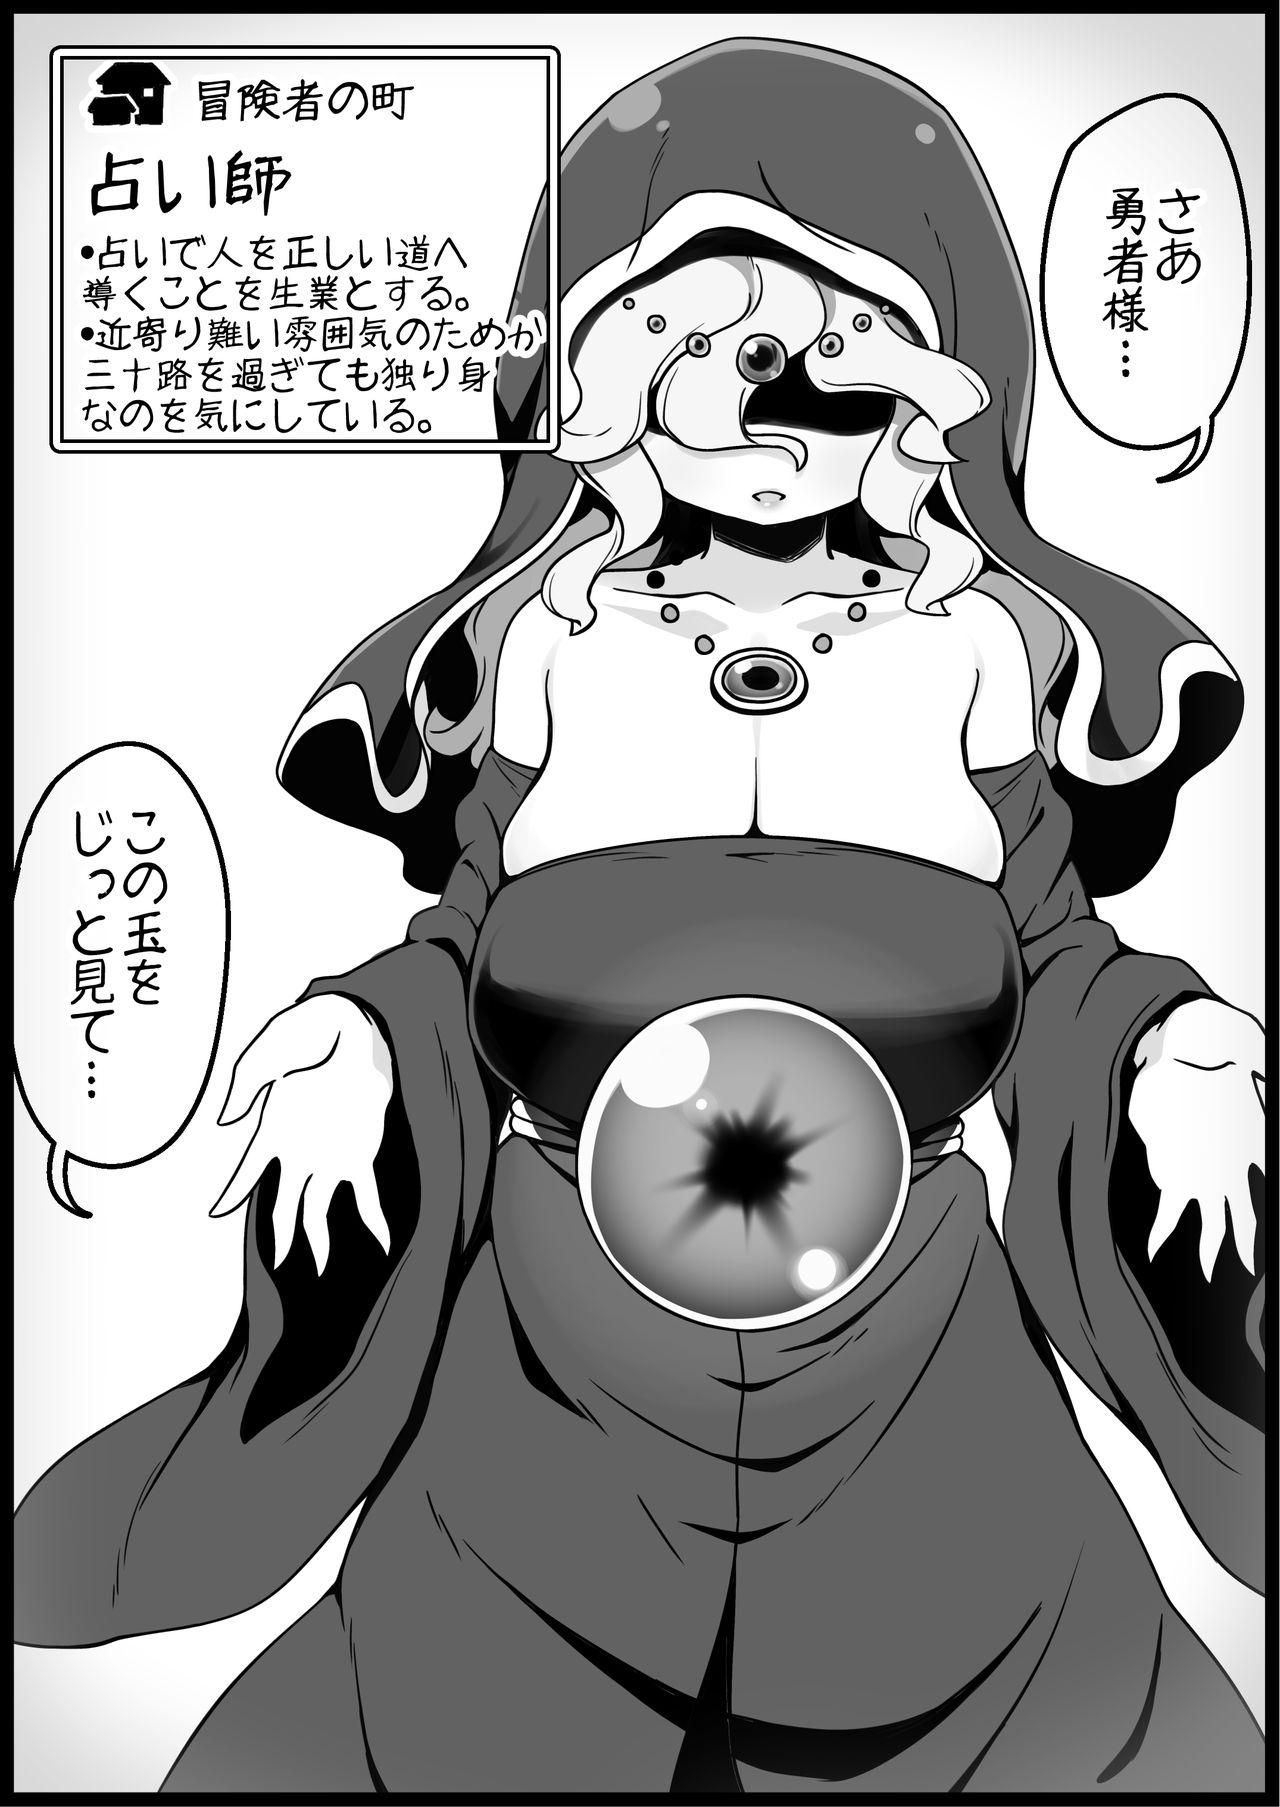 Cam Sex [Succubus Egg] Fantasy World 2 Too Forgiving to Heroes-Continued NPC (mob) Opponent-Centered Short H Manga Collection- - Original Banho - Page 6